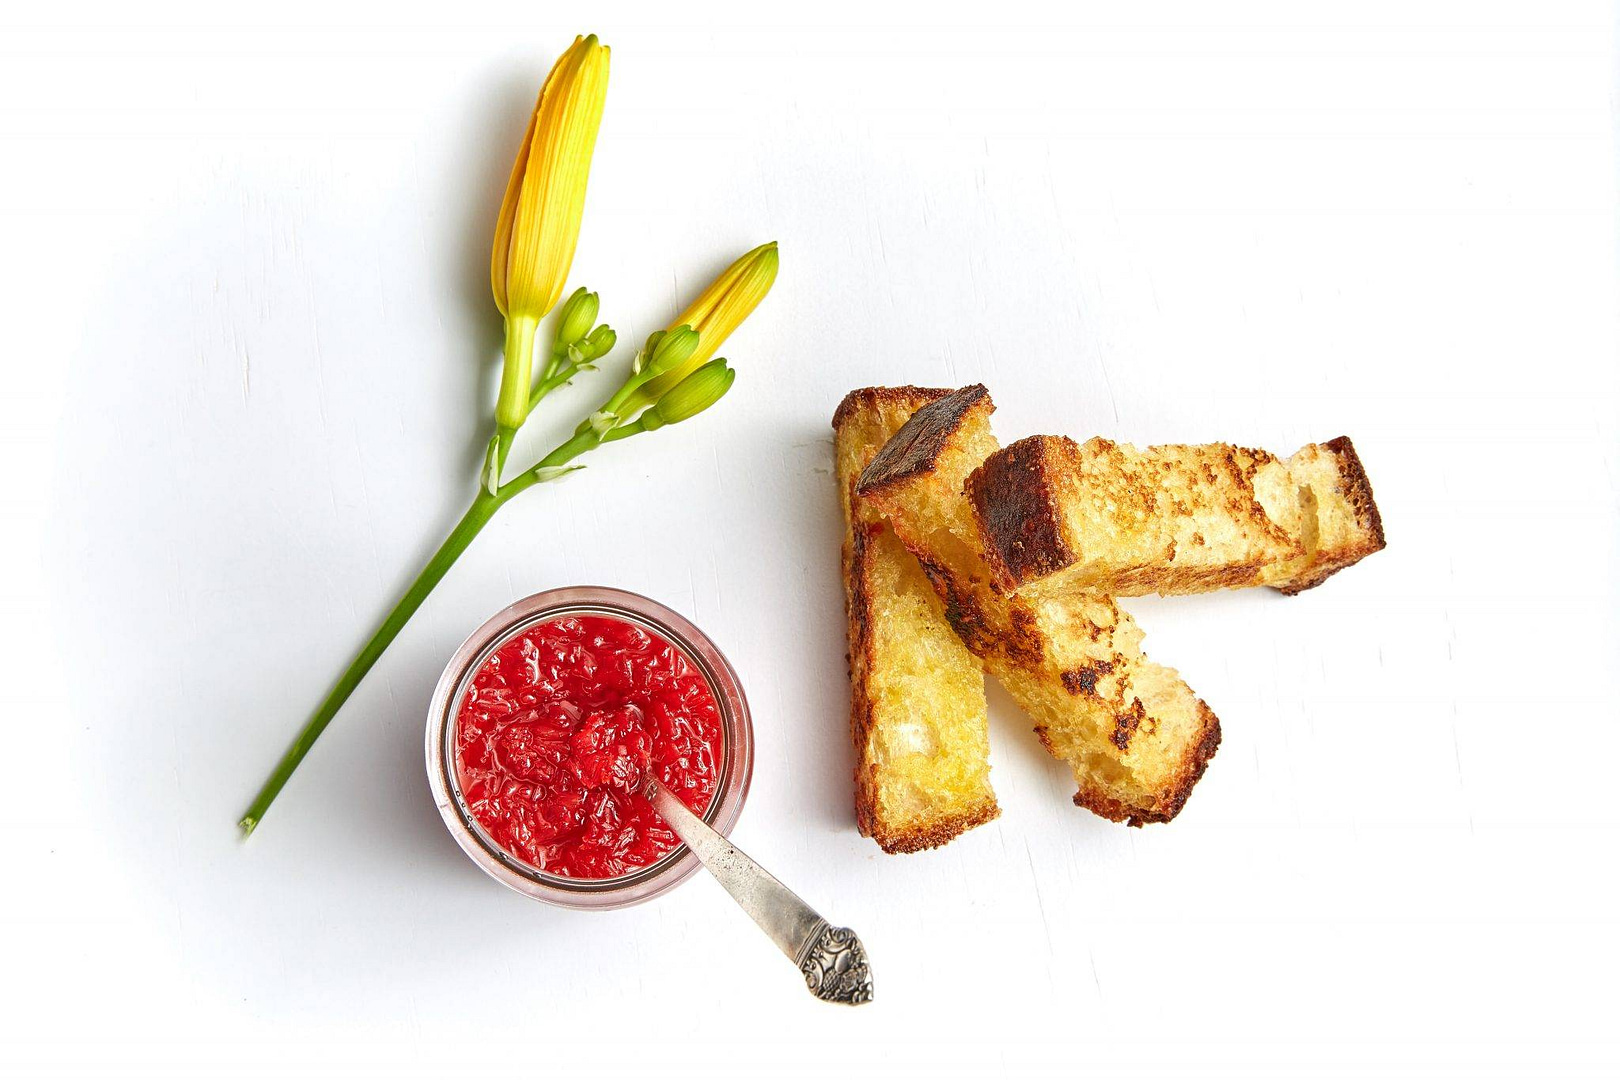 Day Lily and Cranberry Jam